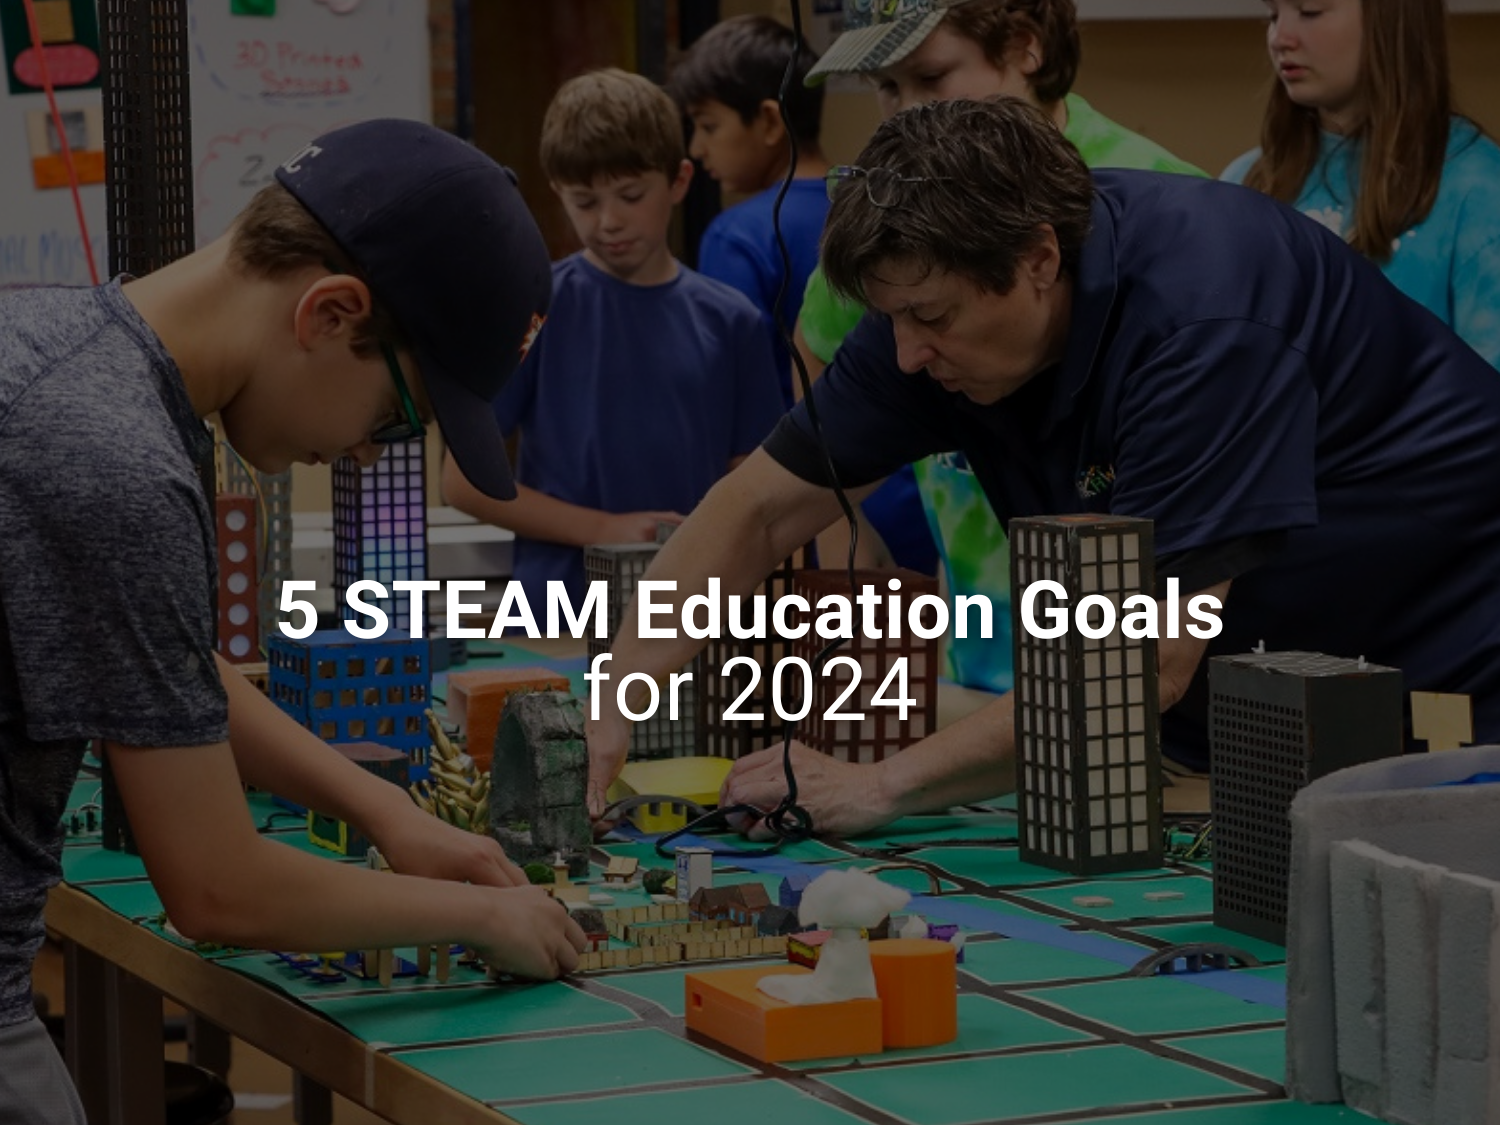 5 STEAM Education Goals for 2024